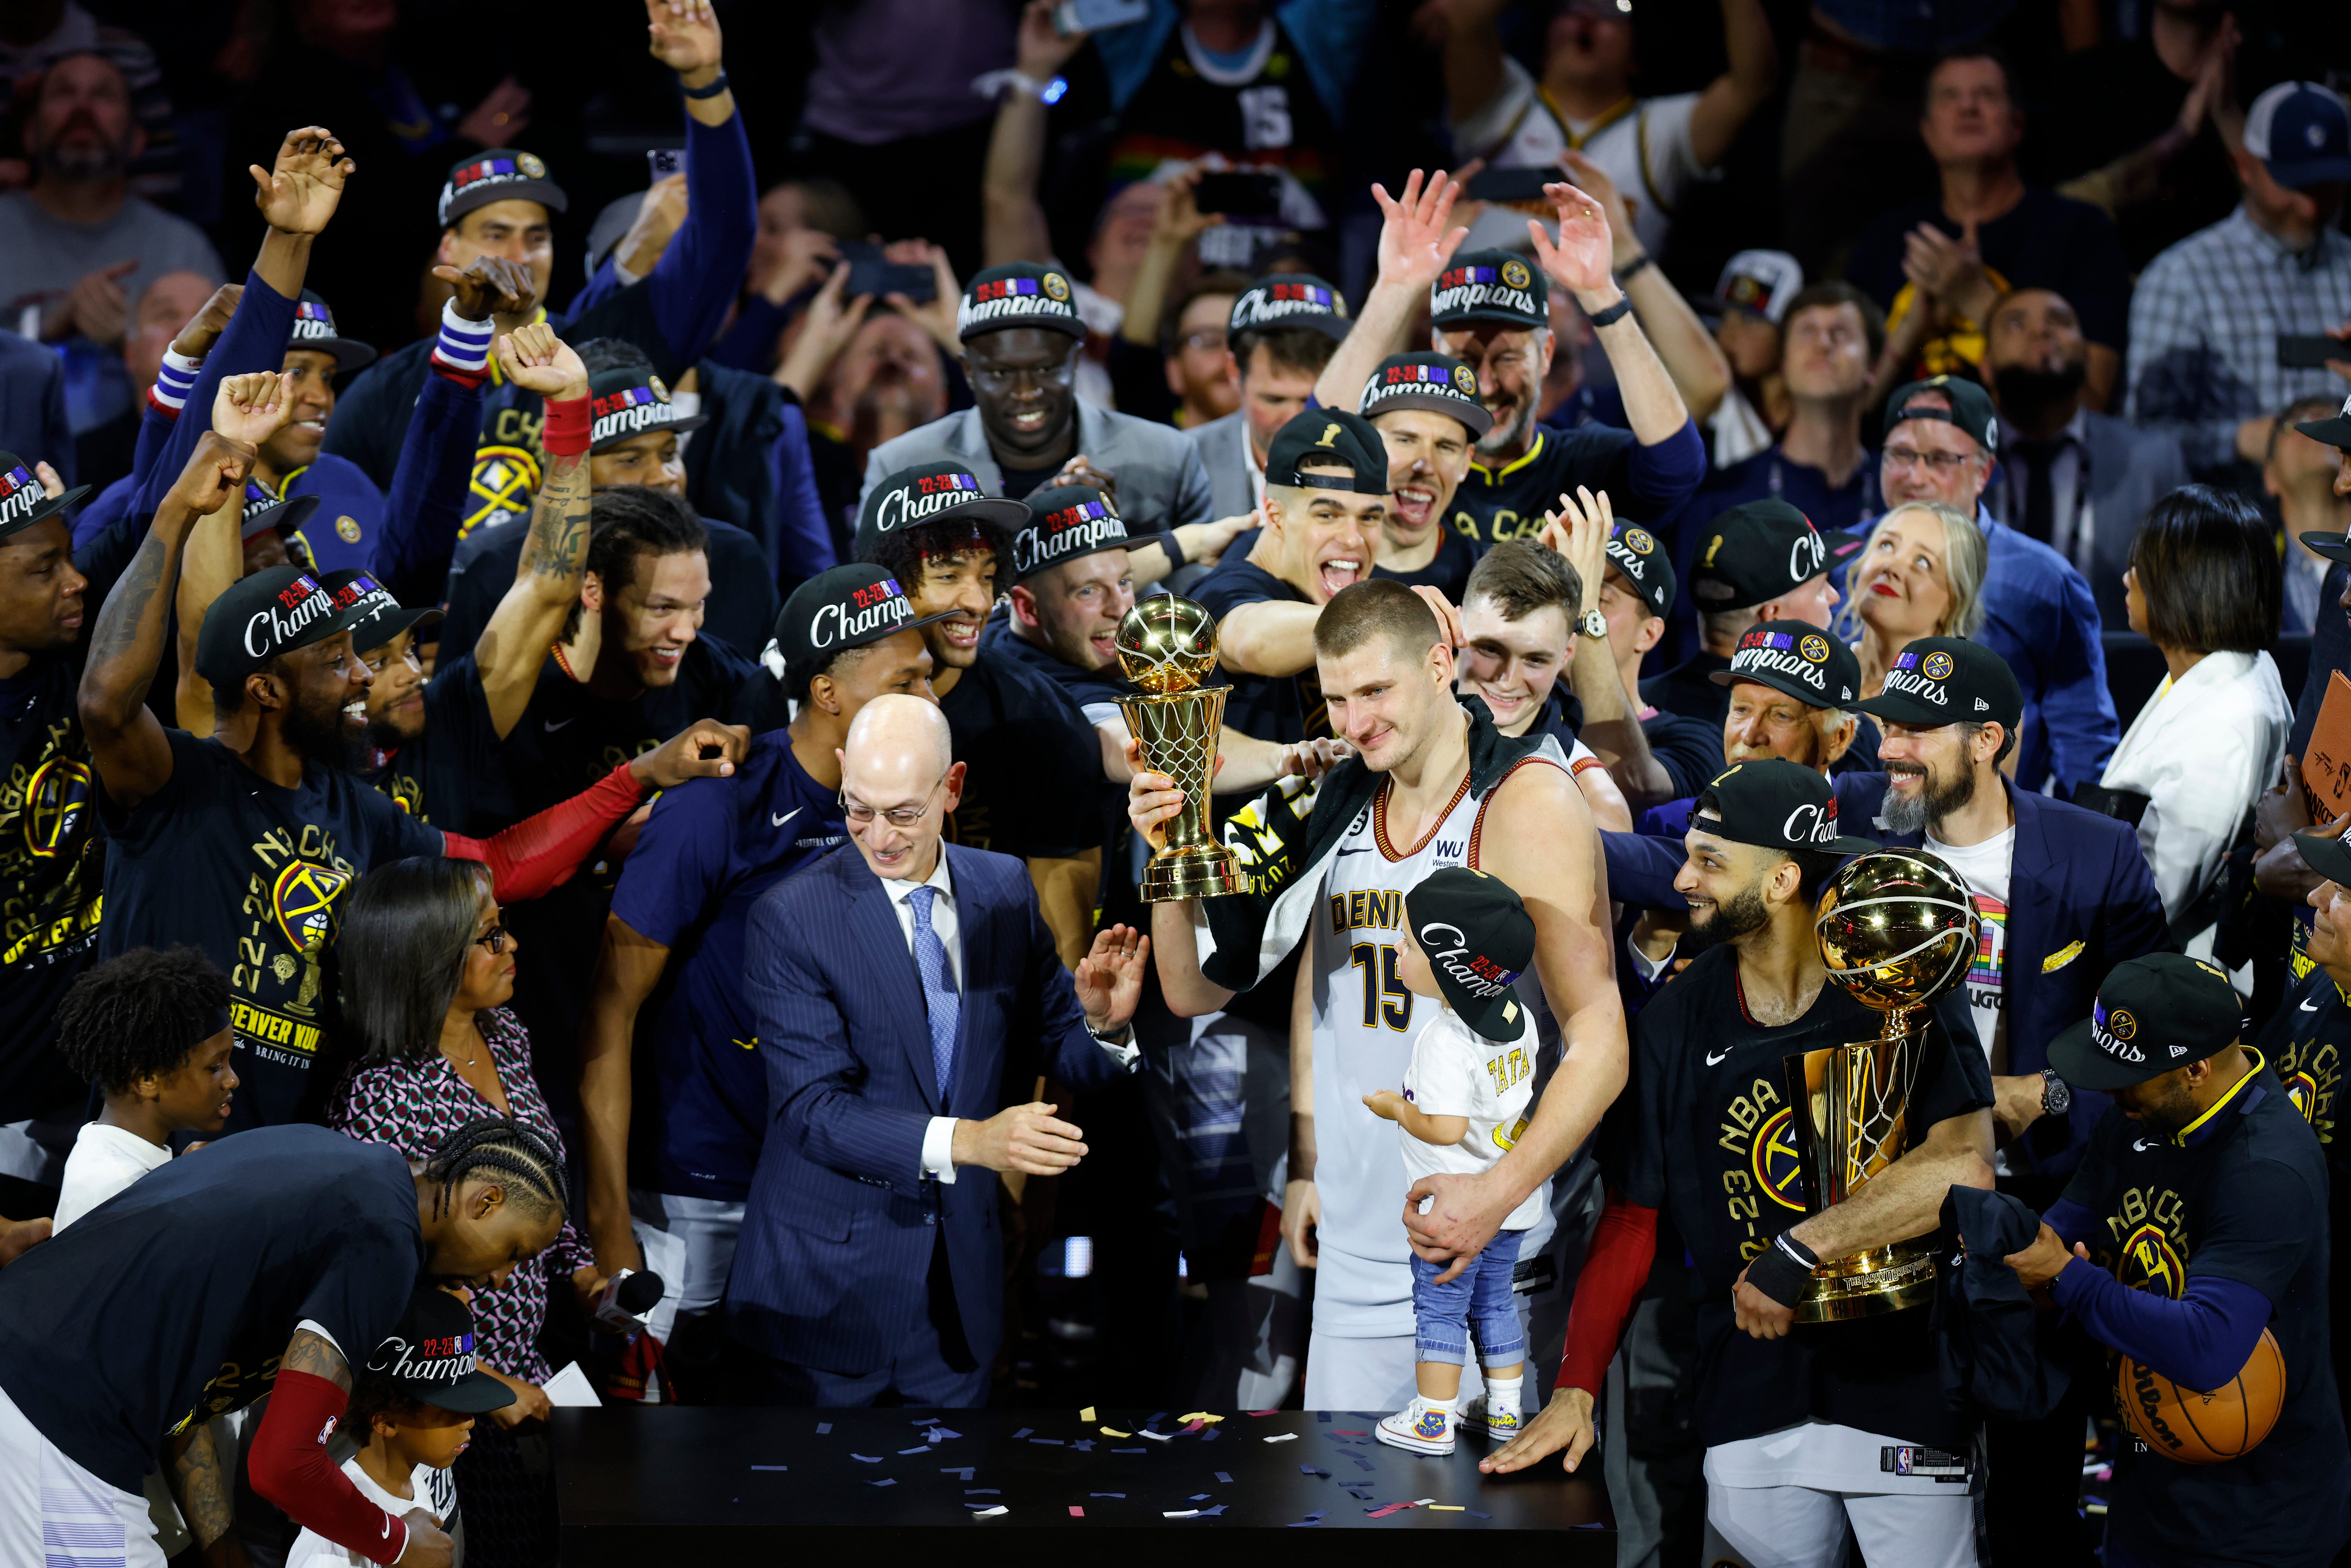 DENVER NUGGETS WIN FIRST NBA CHAMPIONSHIP IN FRANCHISE HISTORY WITH 4-1  FINALS WIN OVER HEAT